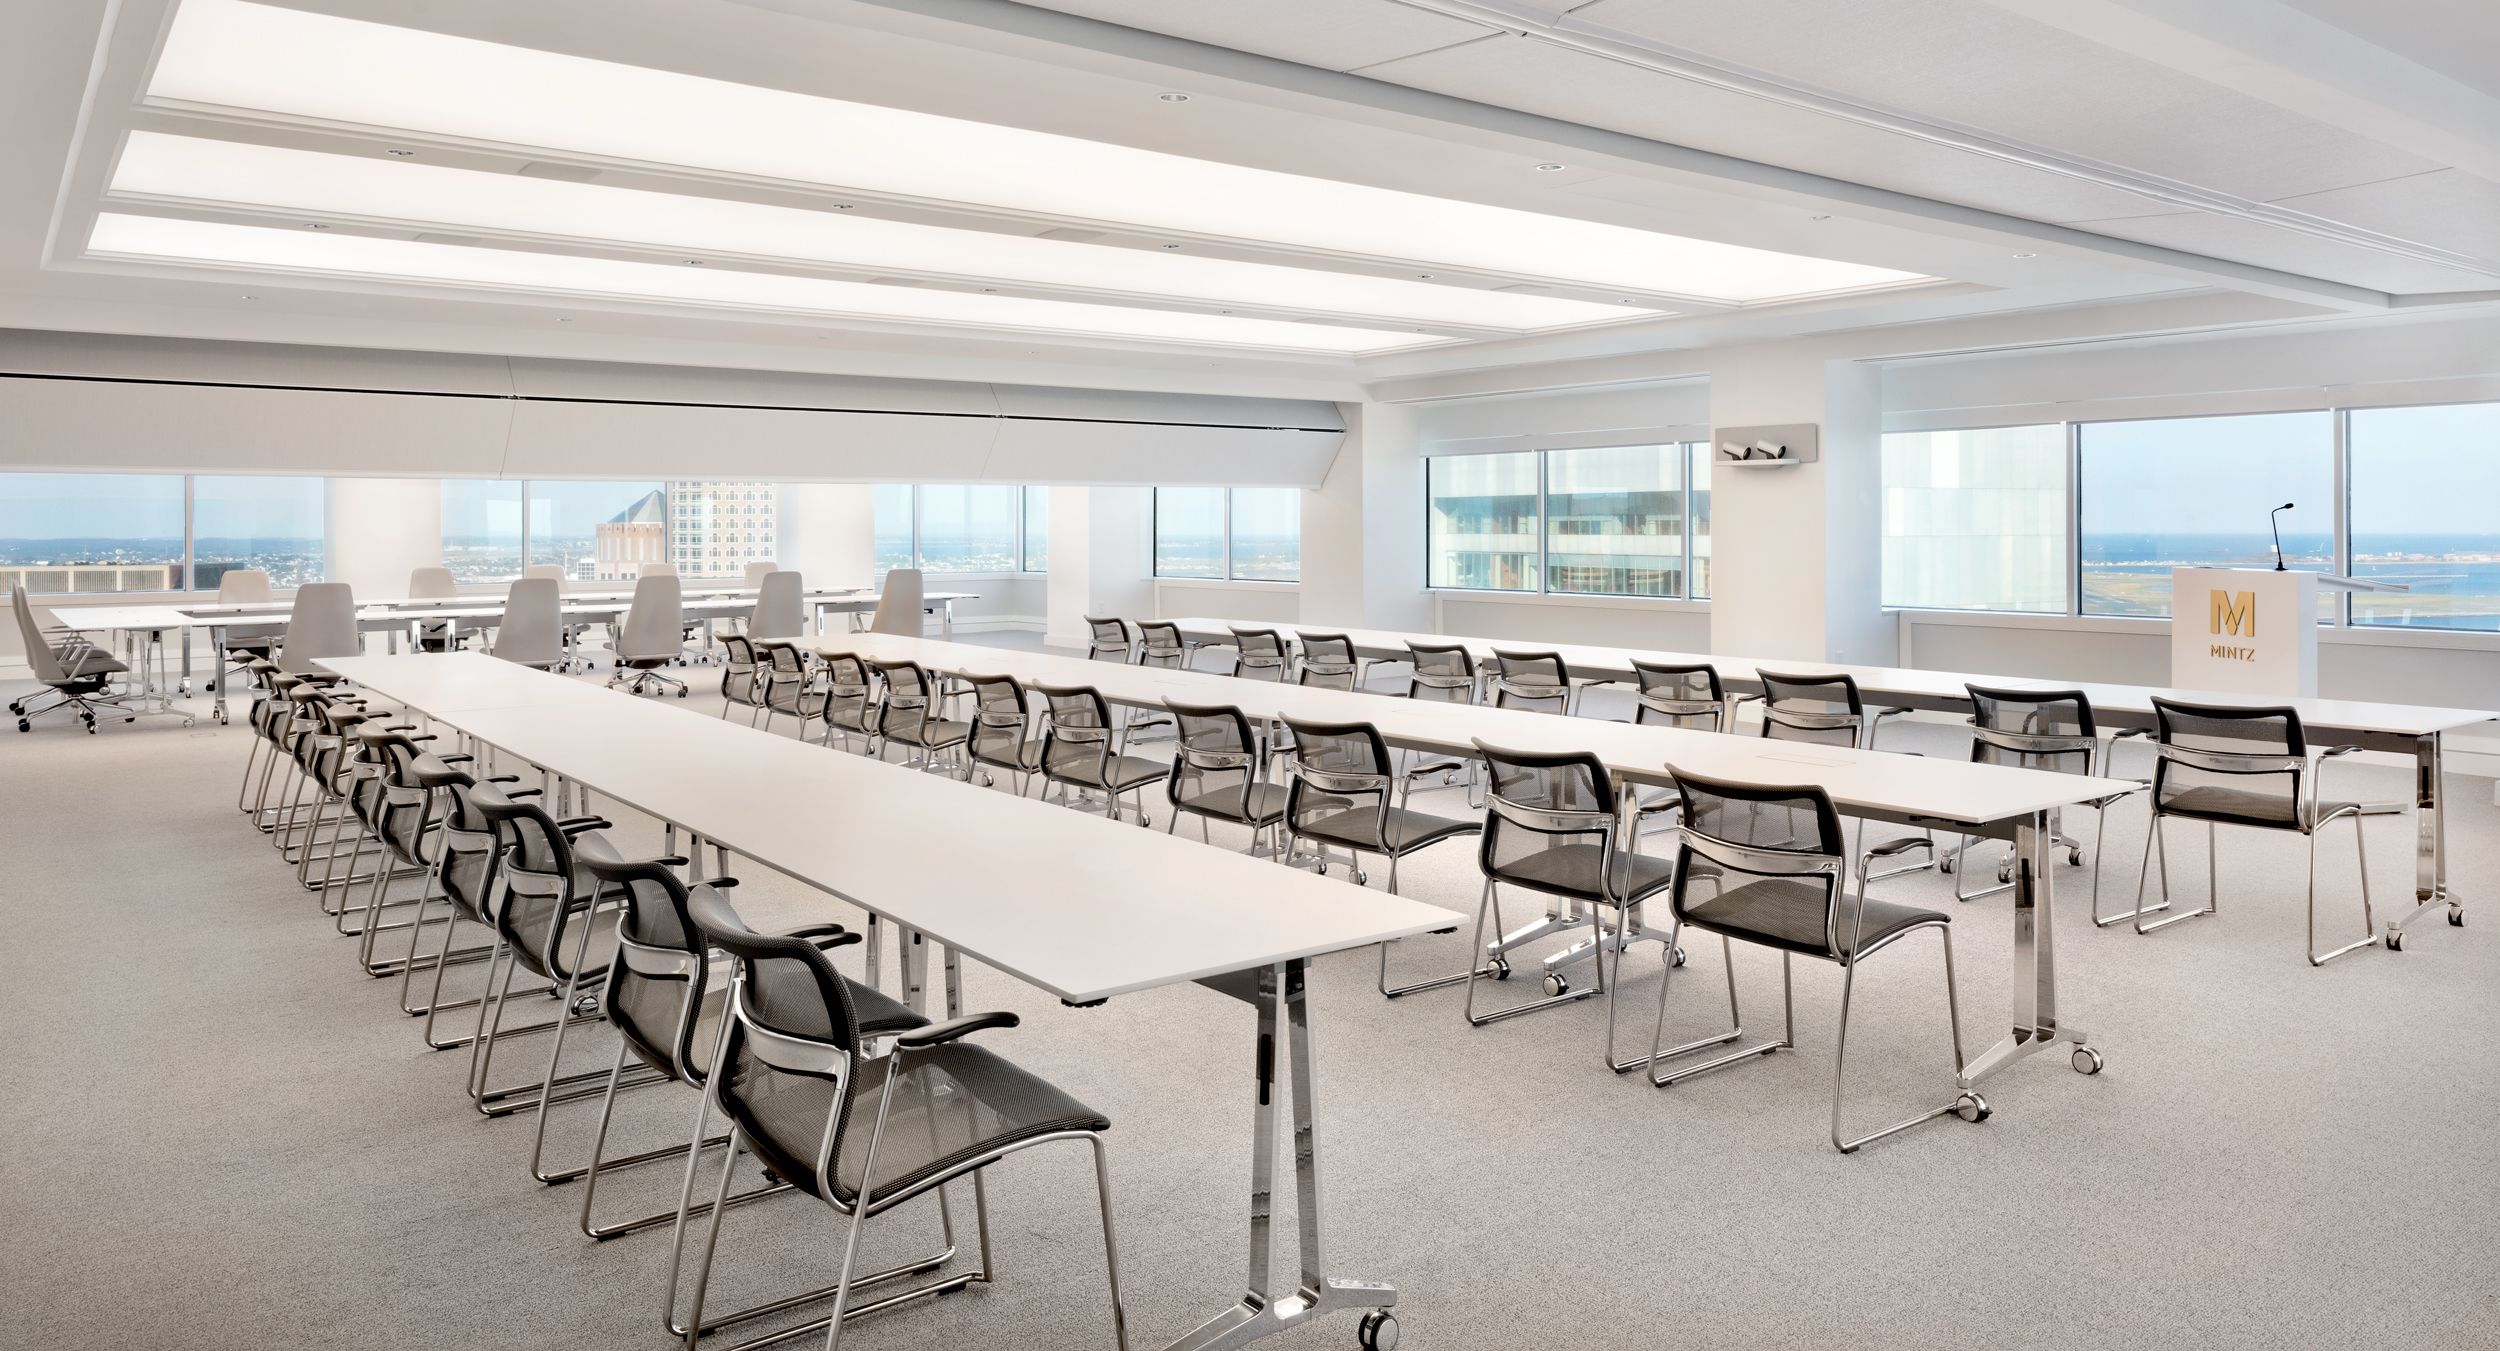 SKILL reconfigurable tables with polished aluminum bases and white Fenix surfaces. A MOTUS mobile lectern in designer white completes this flexible space.